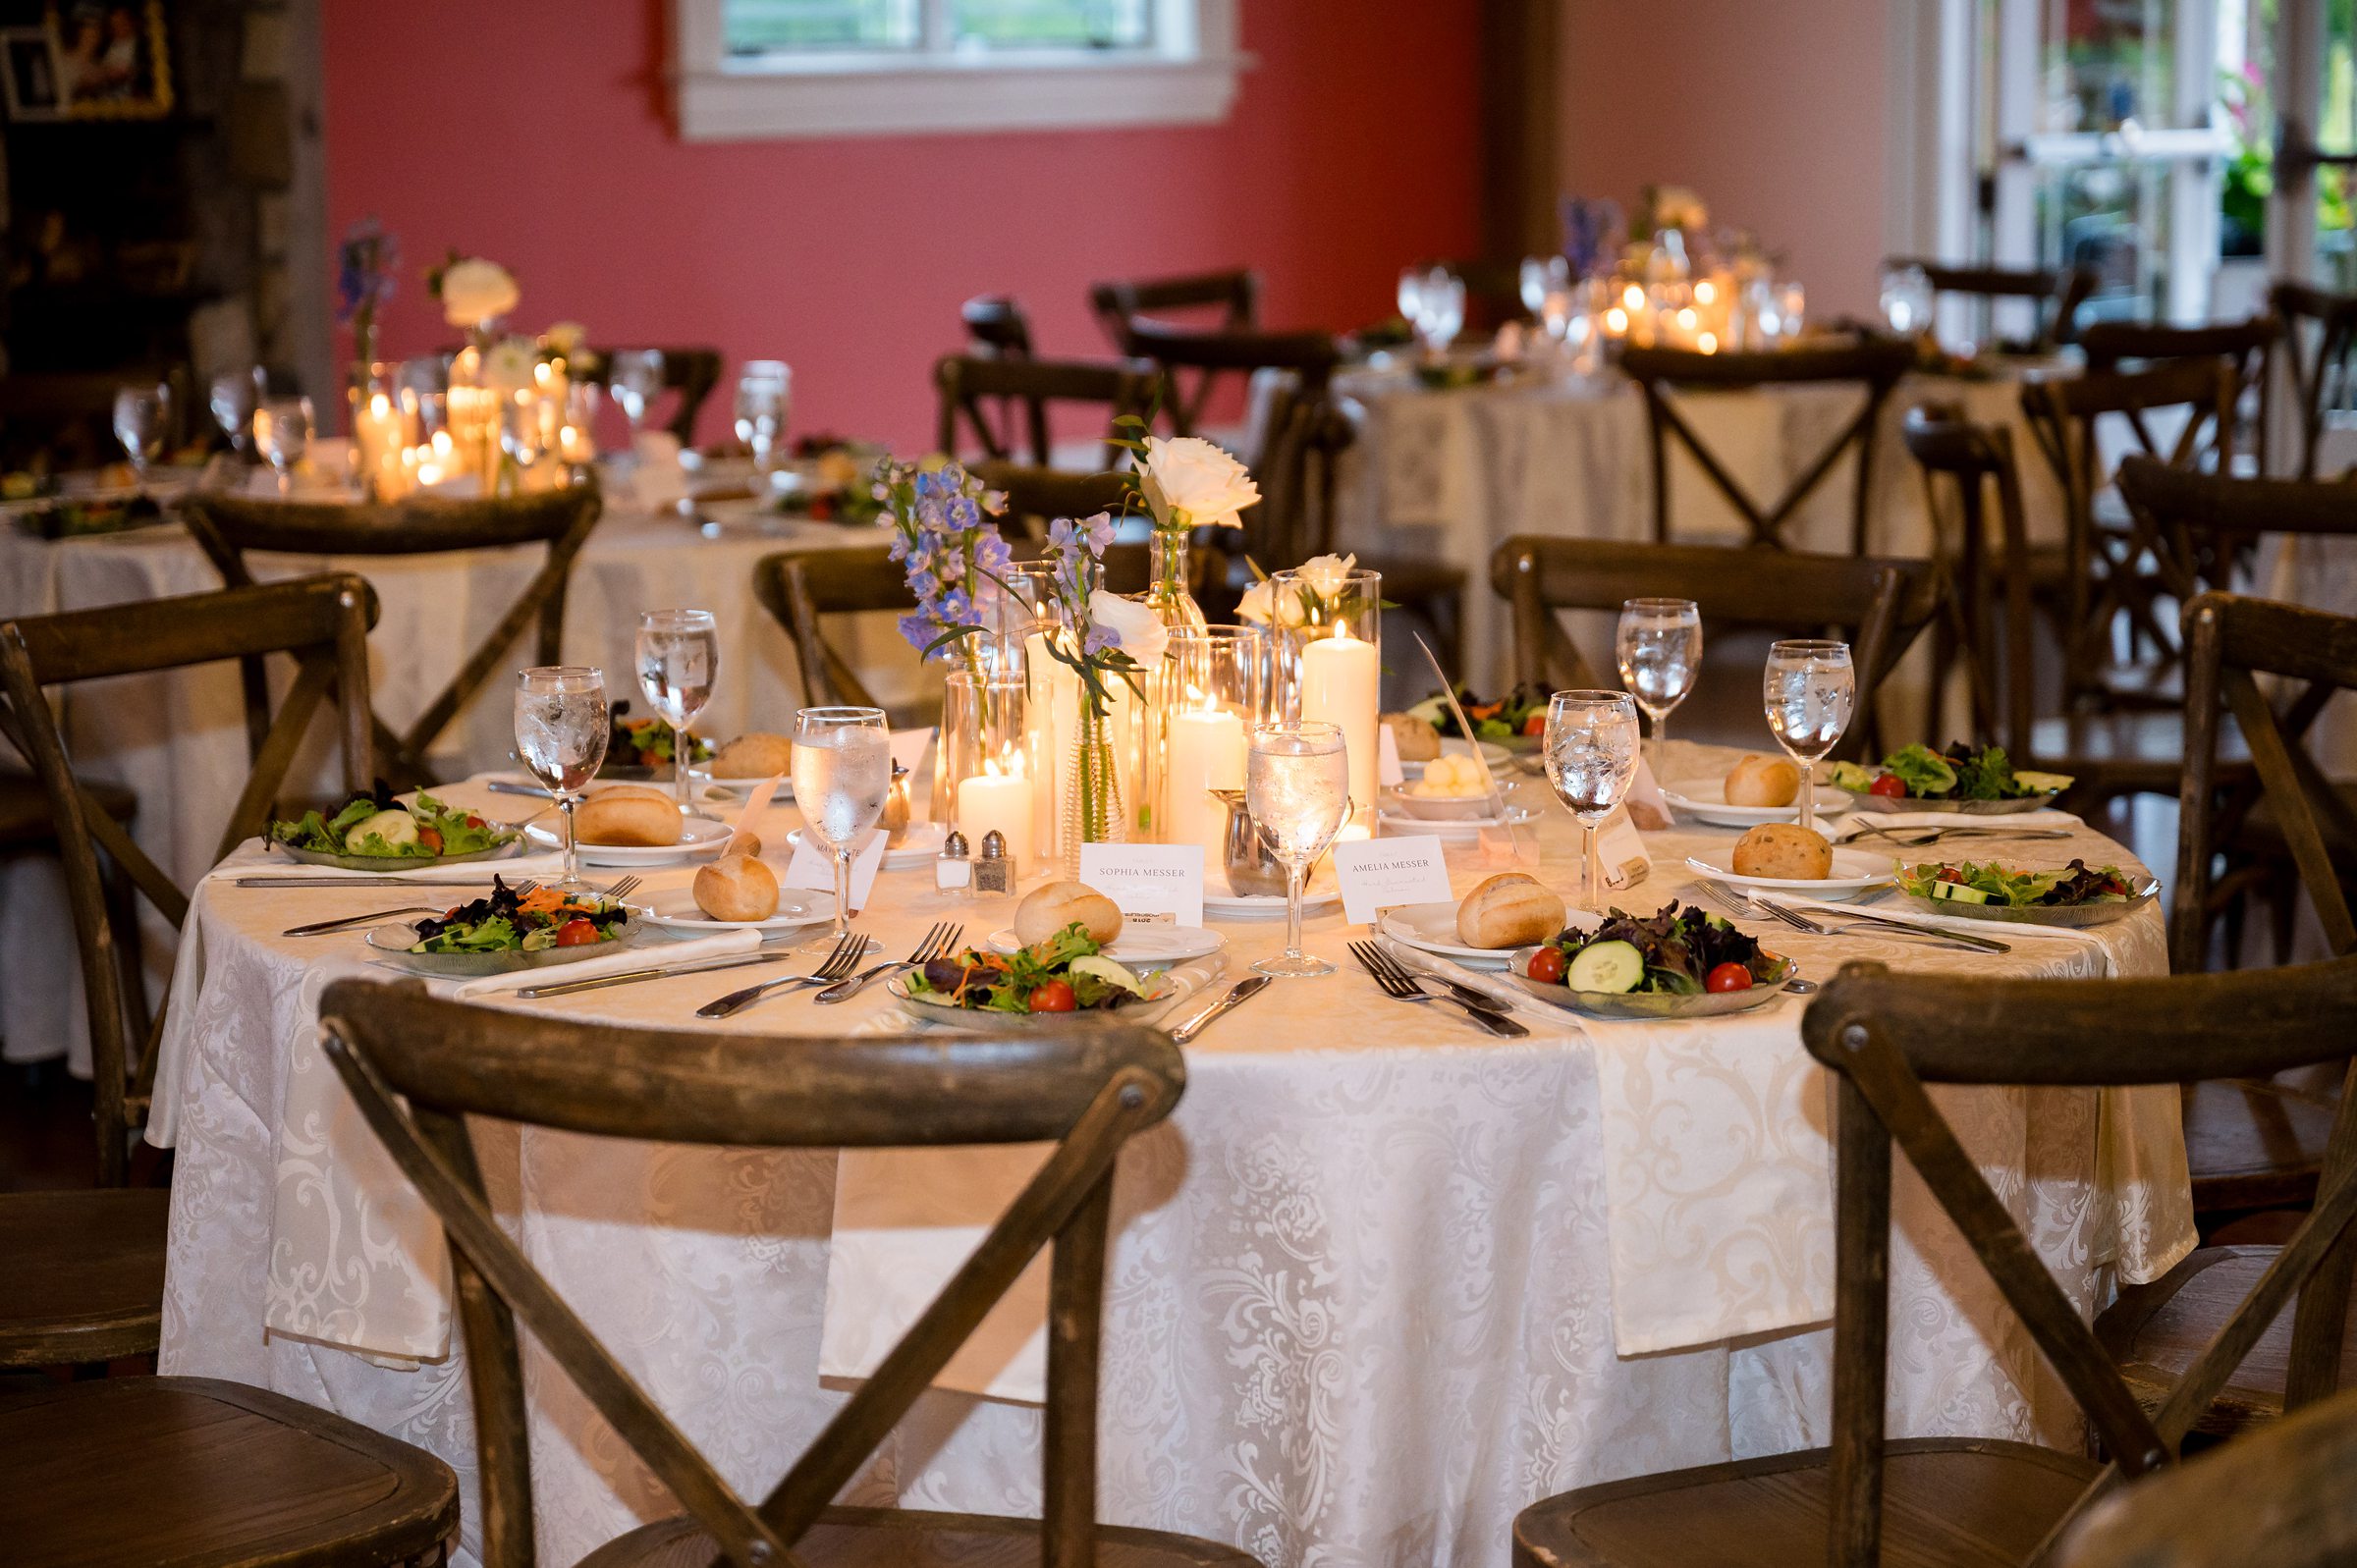 Willow Creek Winery Wedding with elegantly set tables with white tablecloths, candles, glasses, and plates of salad in a warmly lit dining area.